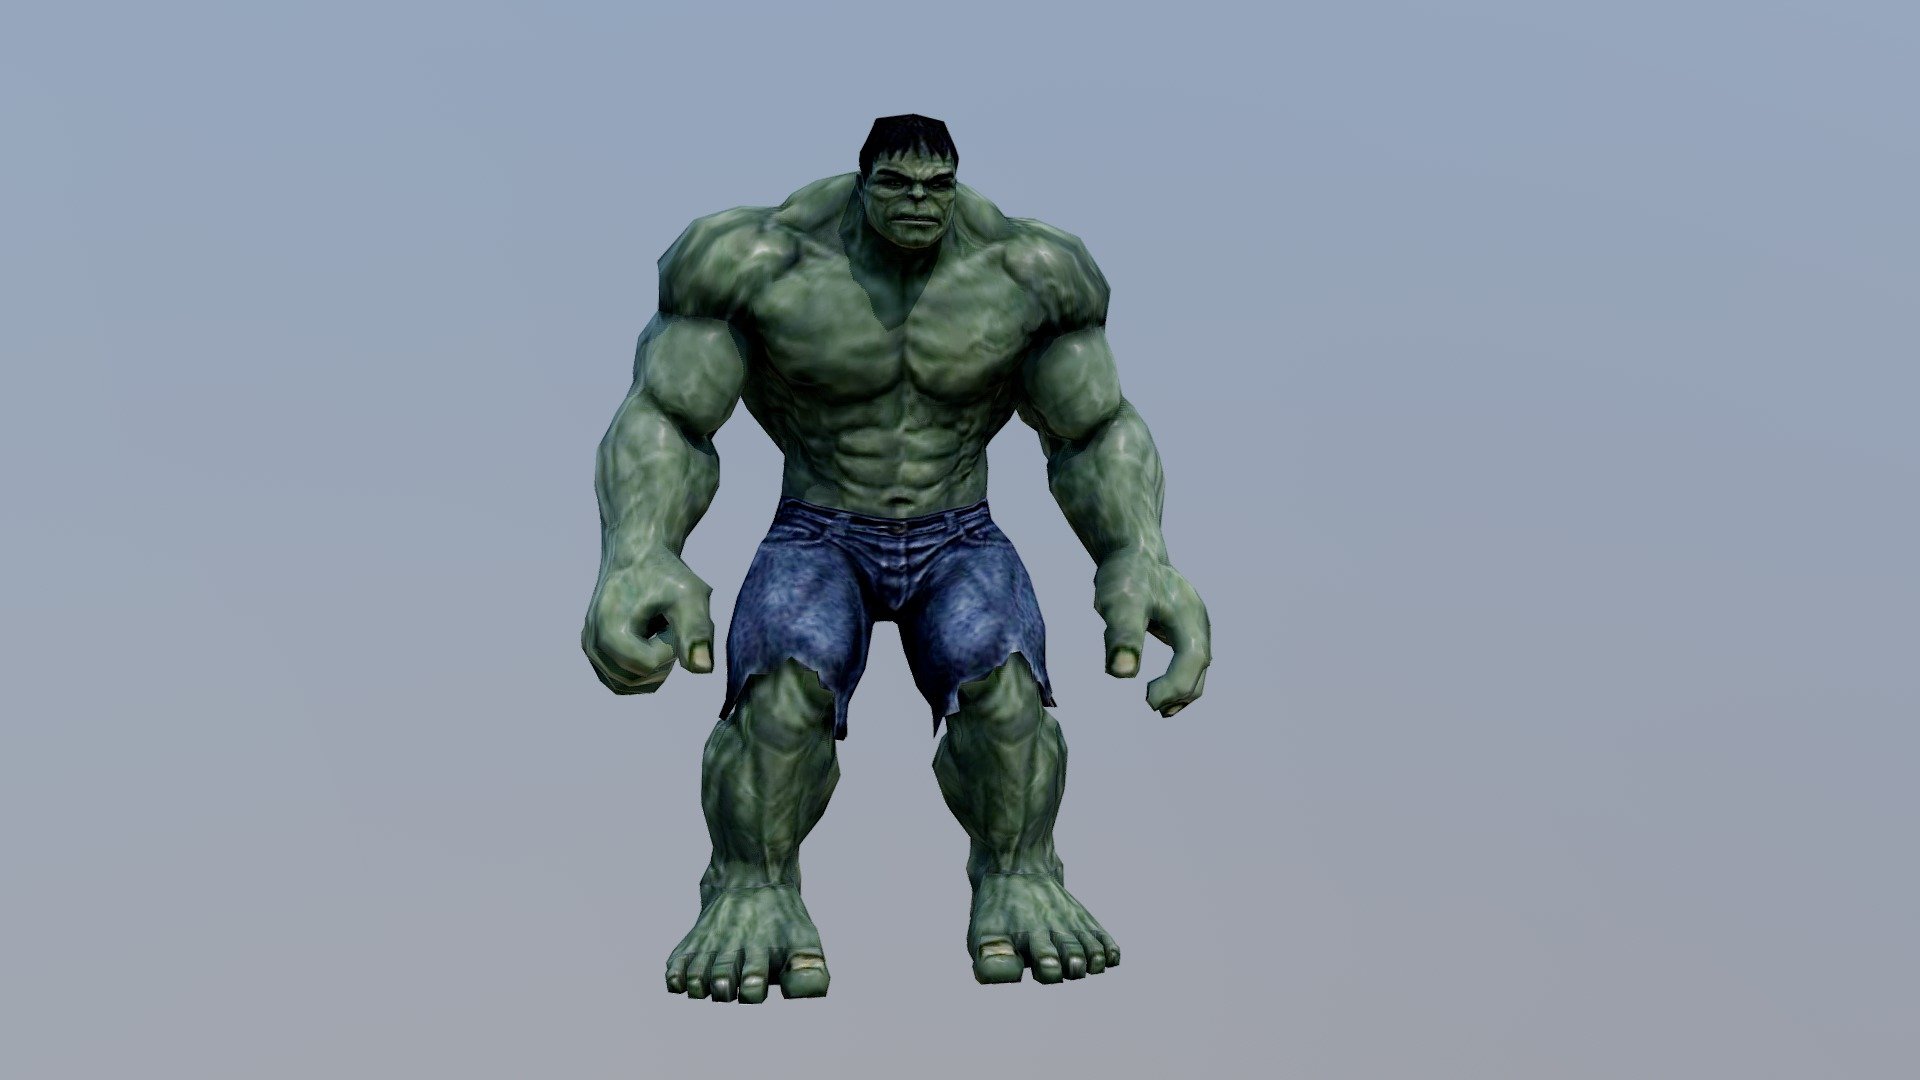 Low poly Hulk.

Rigged and animated in Blender - Simple Hulk Animation - 3D model by OCBacon 3d model